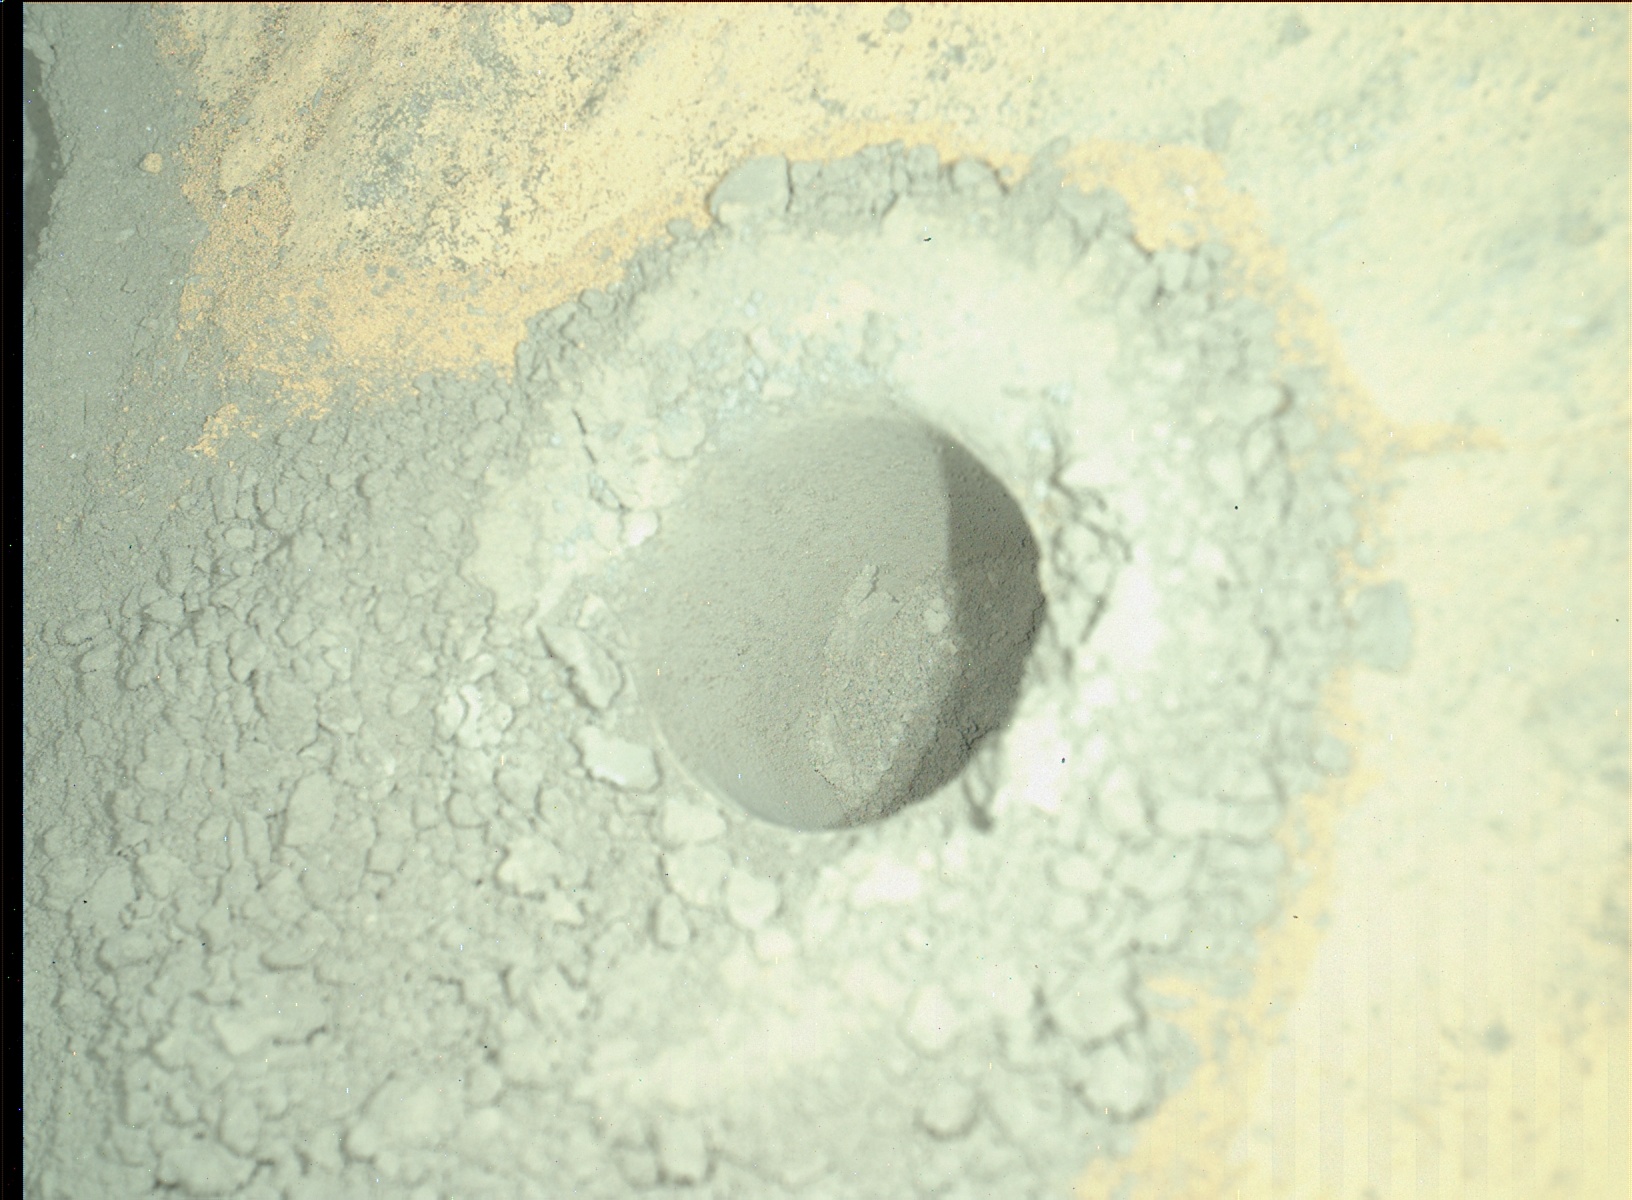 Nasa's Mars rover Curiosity acquired this image using its Mars Hand Lens Imager (MAHLI) on Sol 628, at drive 1330, site number 31